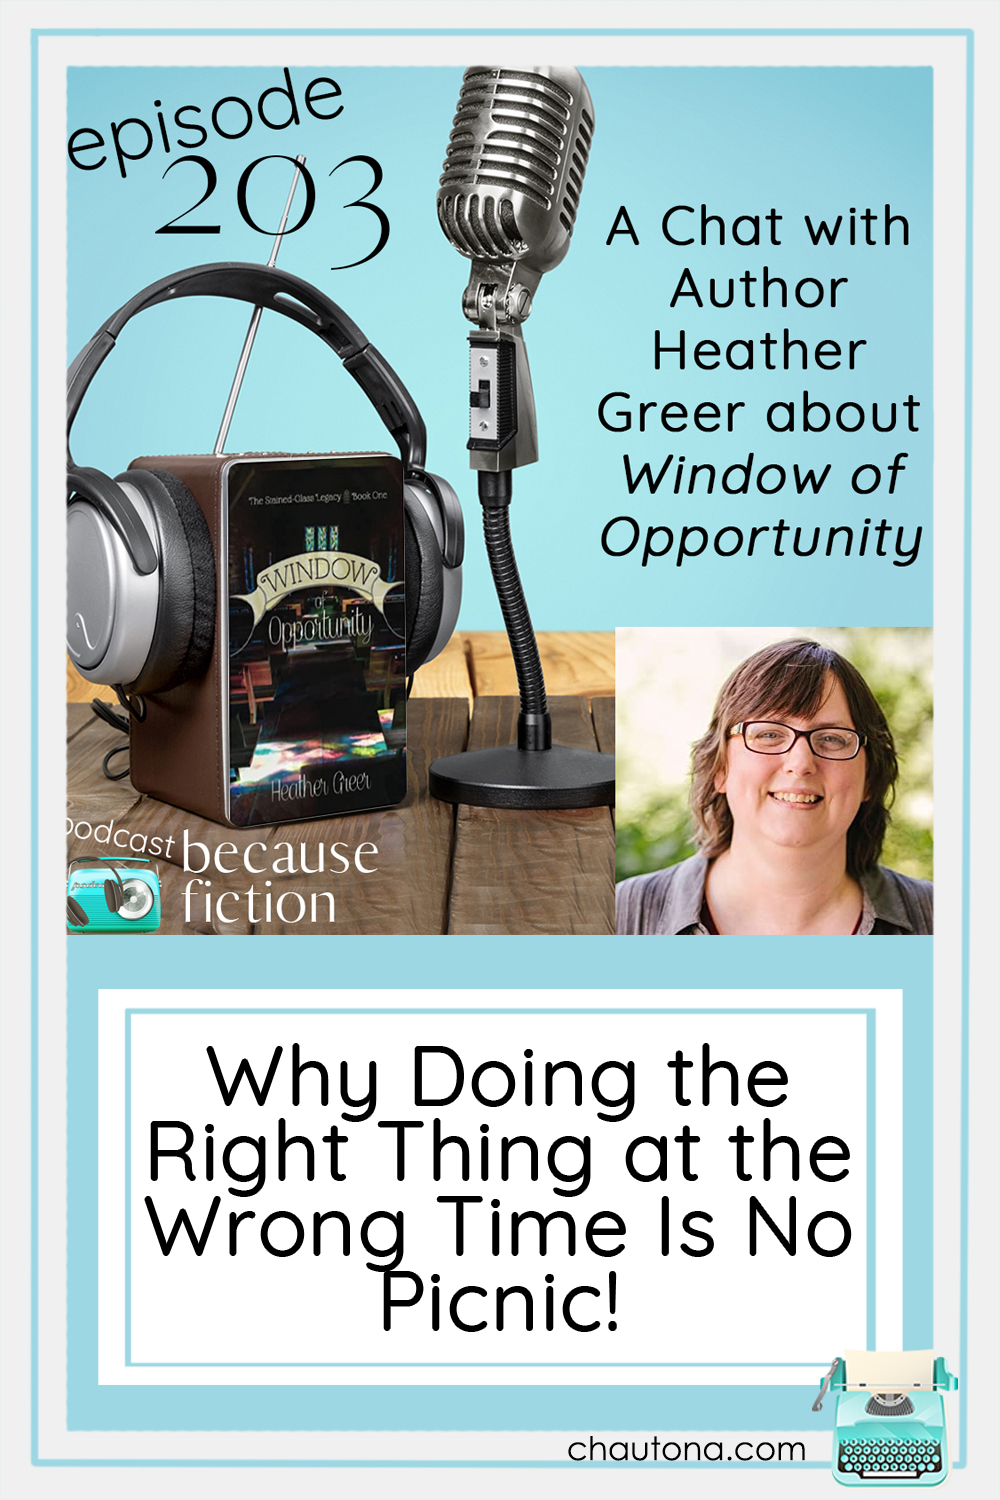 I had a great chat with Heather Greer about her book in the Stained-Glass Legacy series, Window of Opportunity, and it's a doozy! via @chautonahavig